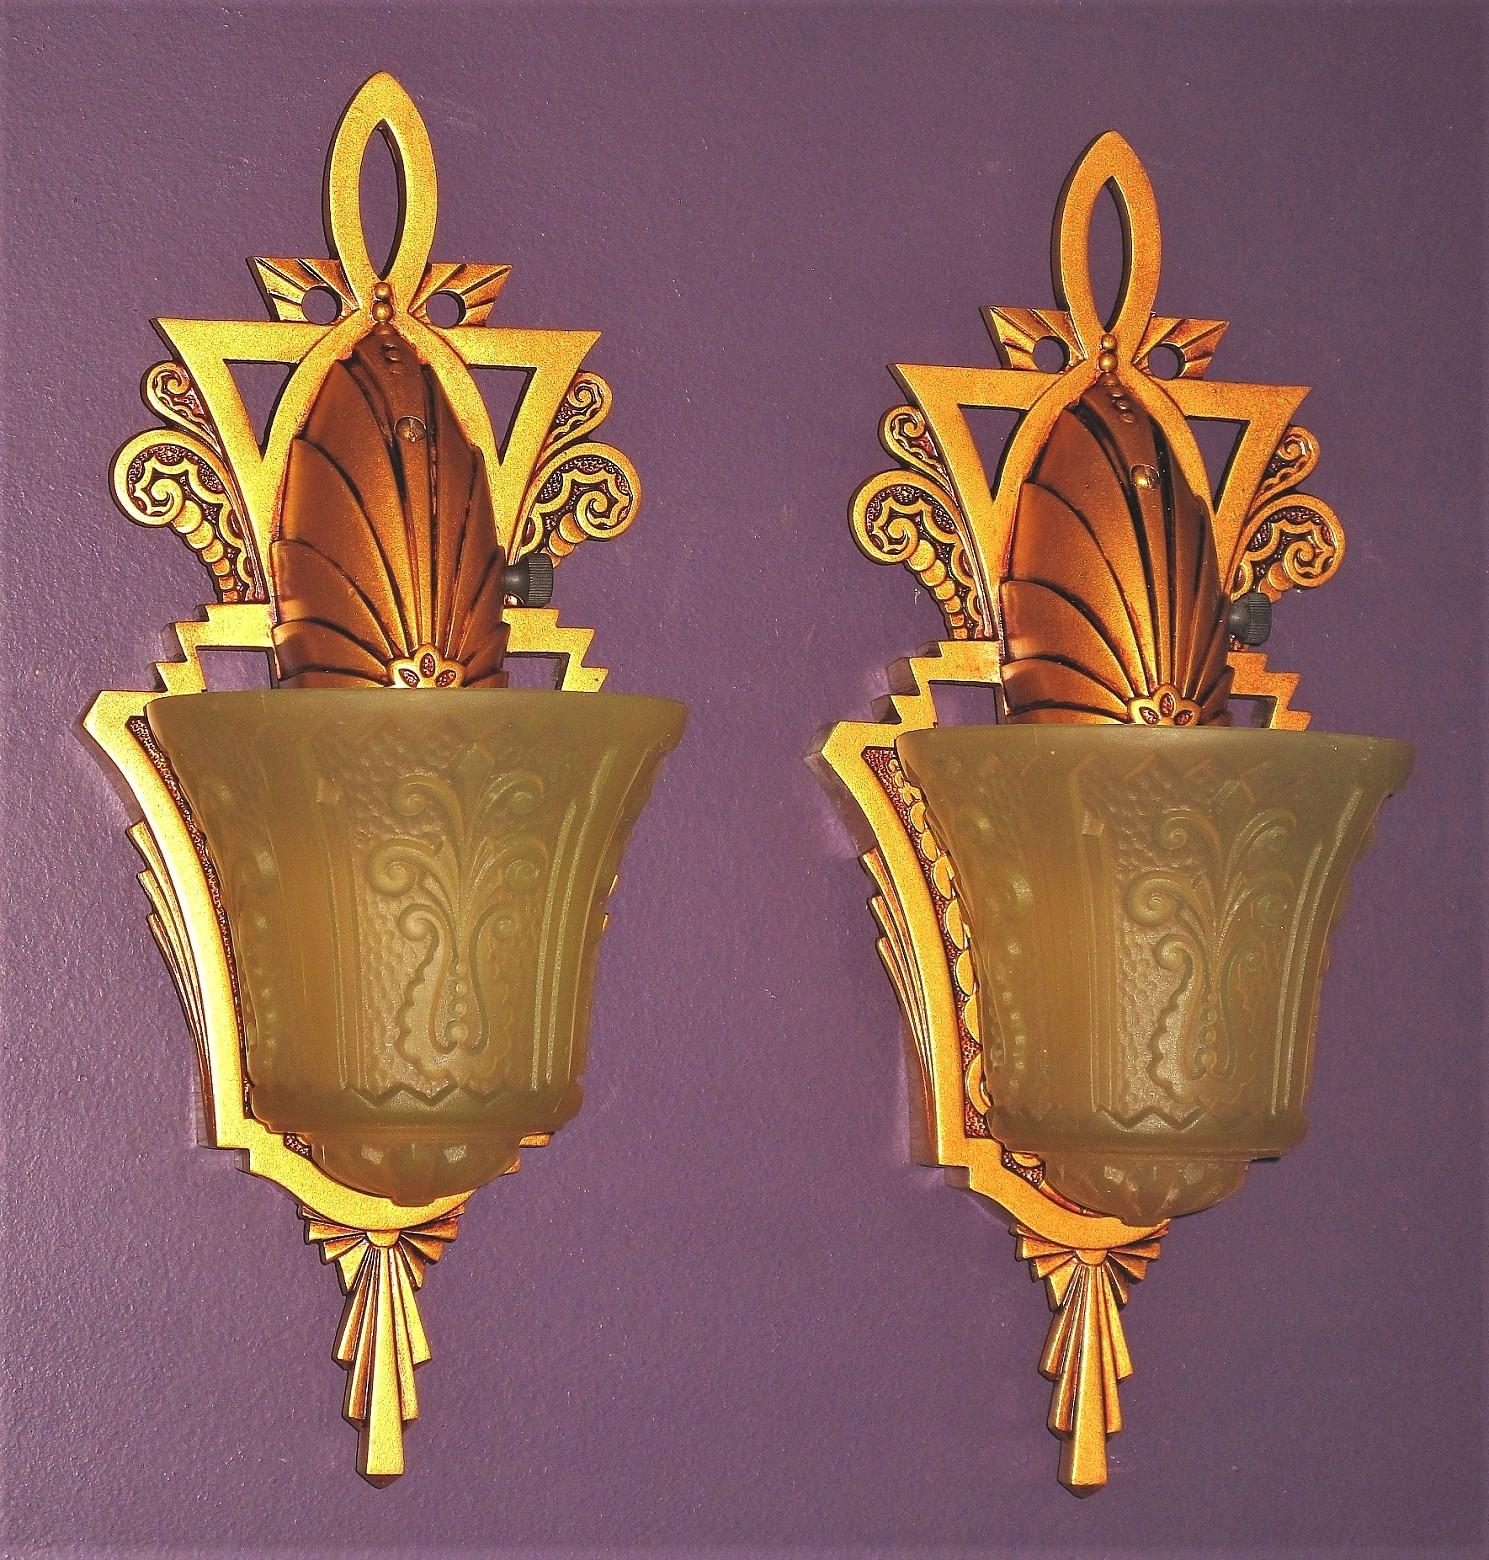 8 Beardslee Vintage Wall Sconces with Original Vintage Glass Priced per pair For Sale 2